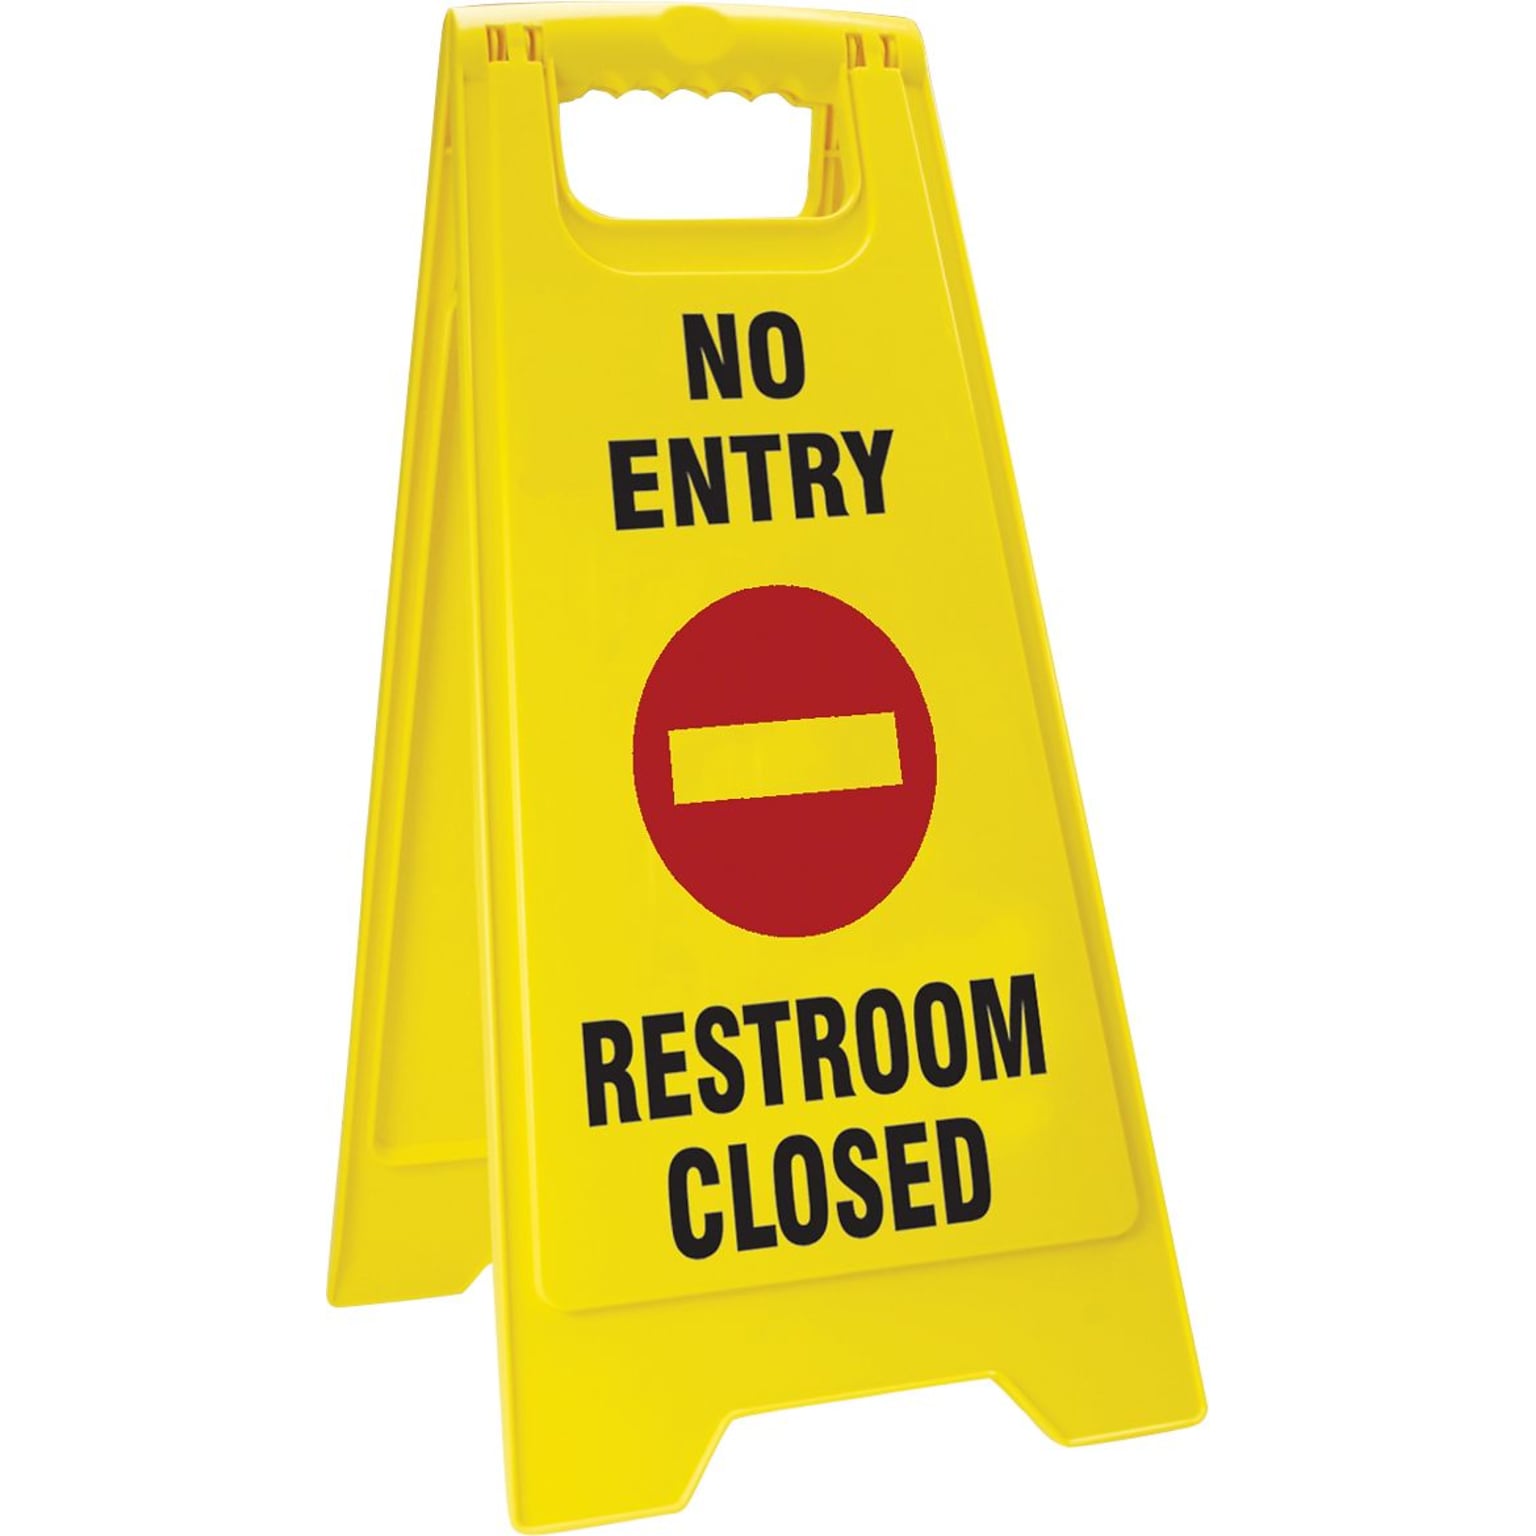 Accuform Signs® Slip-Gard™ NO ENTRY RESTROOM CLOSED 2 X Fold-Ups, Red/Black/Yellow, 25H x 12W